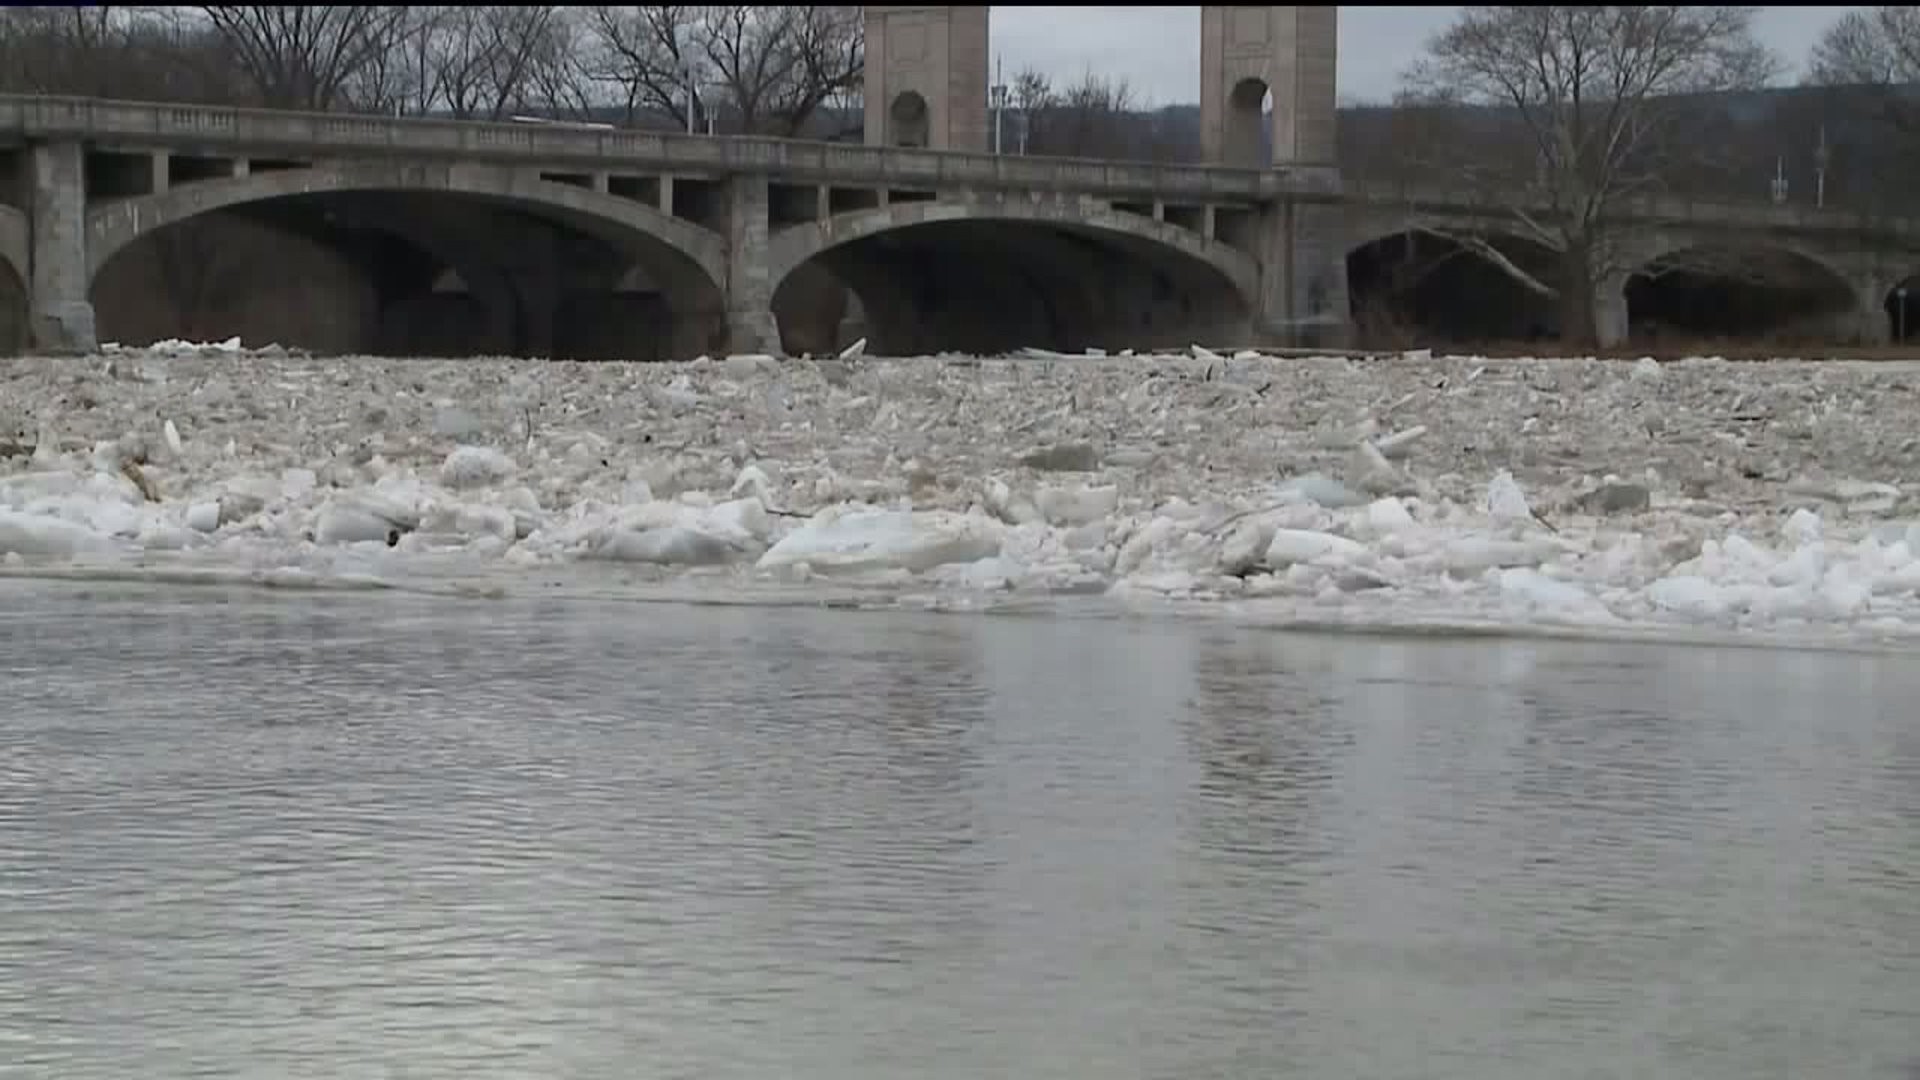 'Serious matter' - County Emergency Officials Give Details of Luzerne County Ice Jams